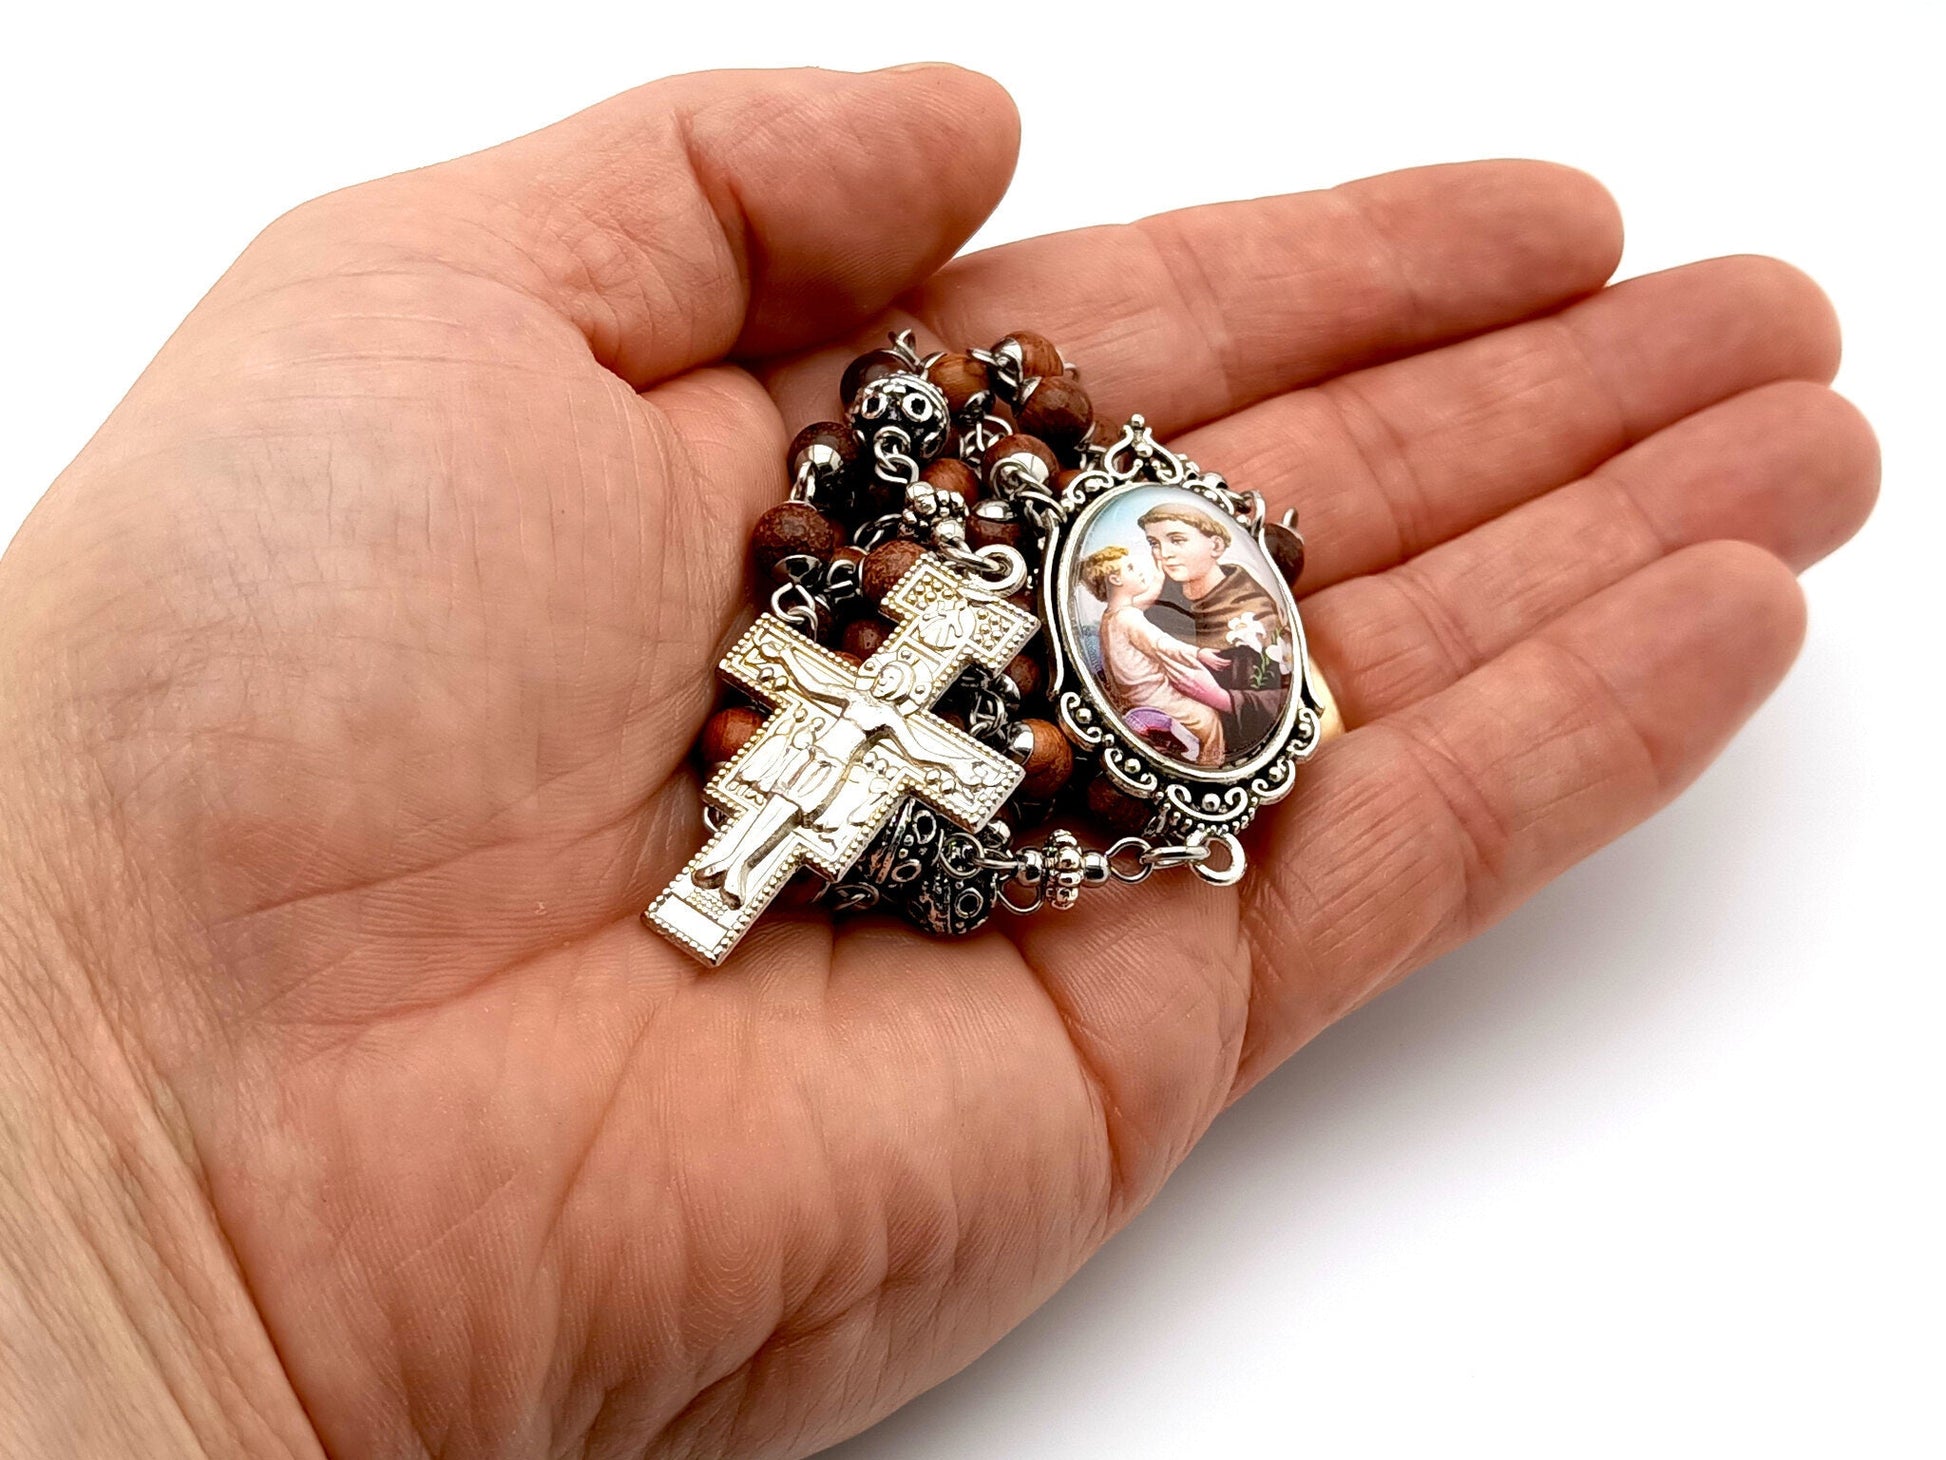 Saint Anthony of Padua unique rosary beads with natural wooden and silver beads, Saint Francis crucifix and picture centre medal.